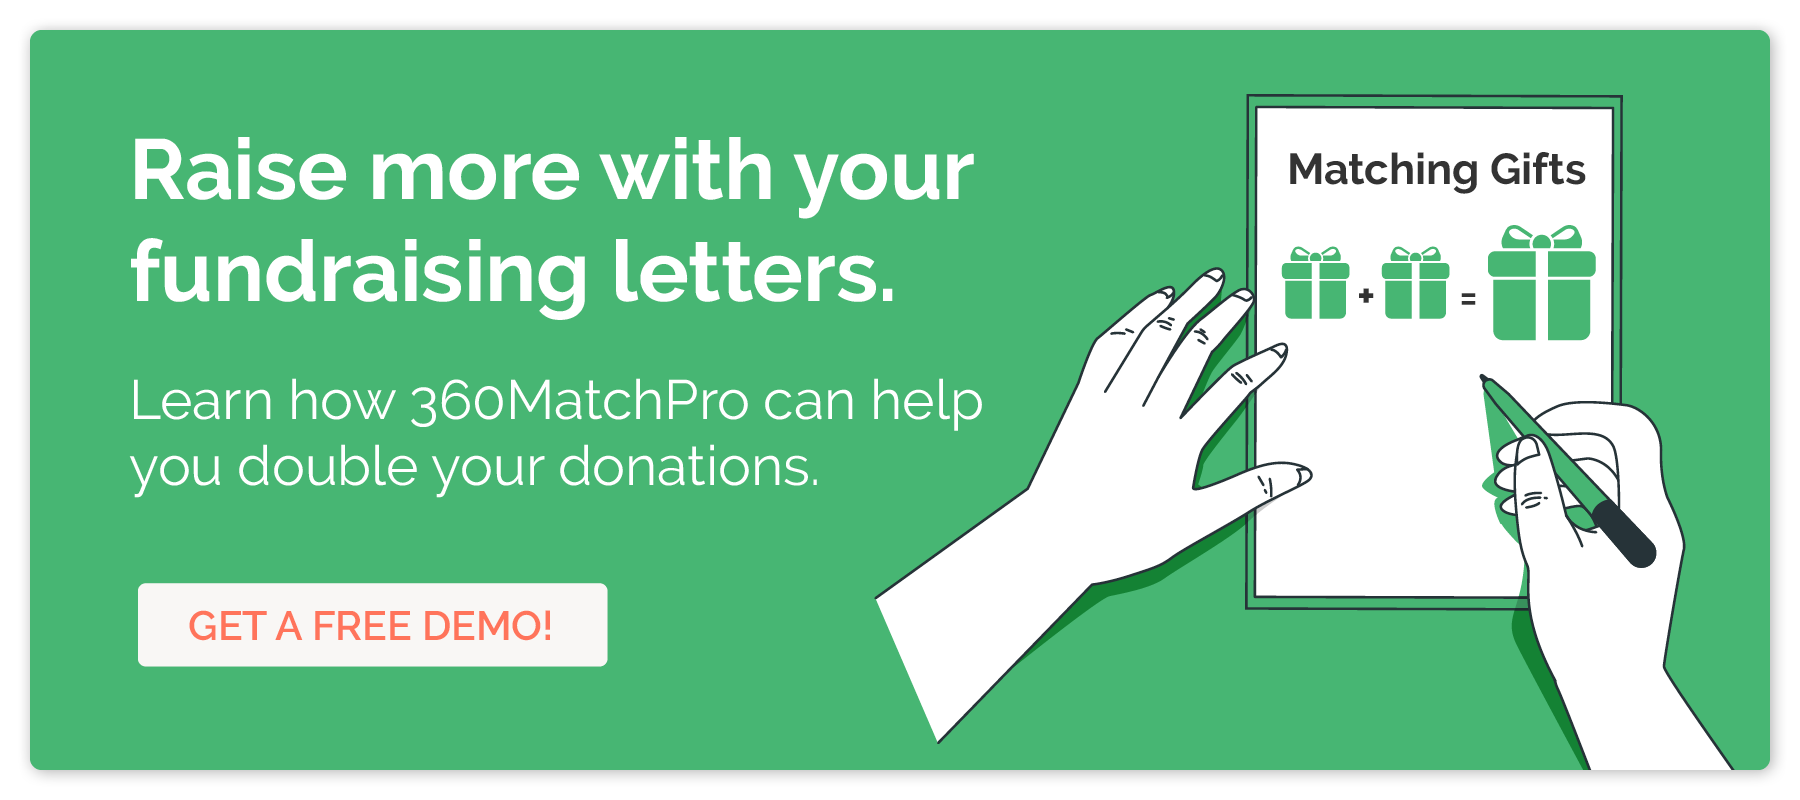 Get a free demo to learn more about 360MatchPro and how your nonprofit can get more out of its fundraising letters with matching gifts.